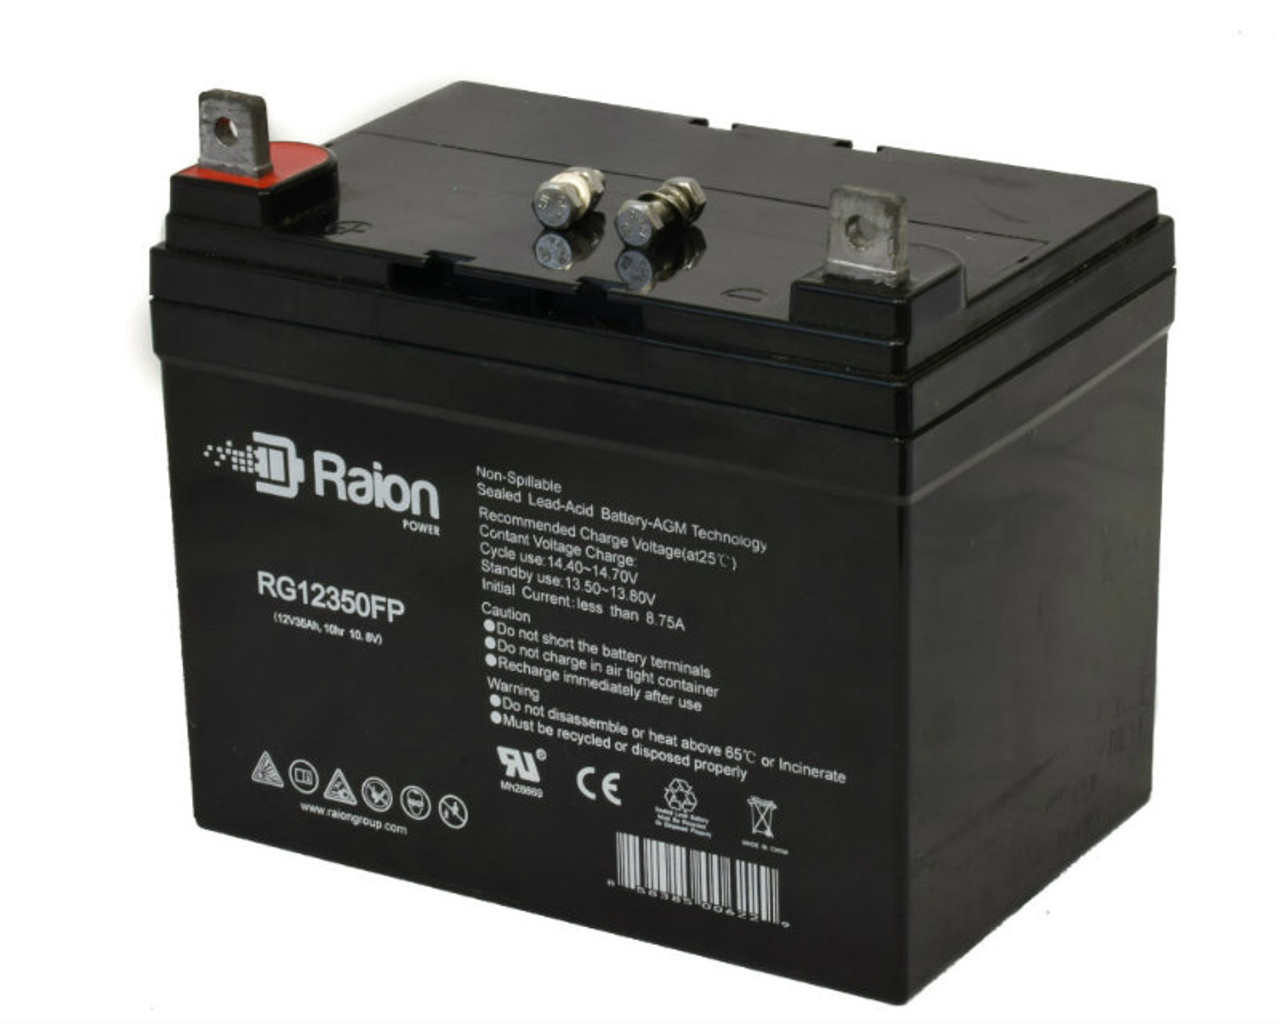 Raion Power Replacement 12V 35Ah Battery for Wei Long U132 - 1 Pack